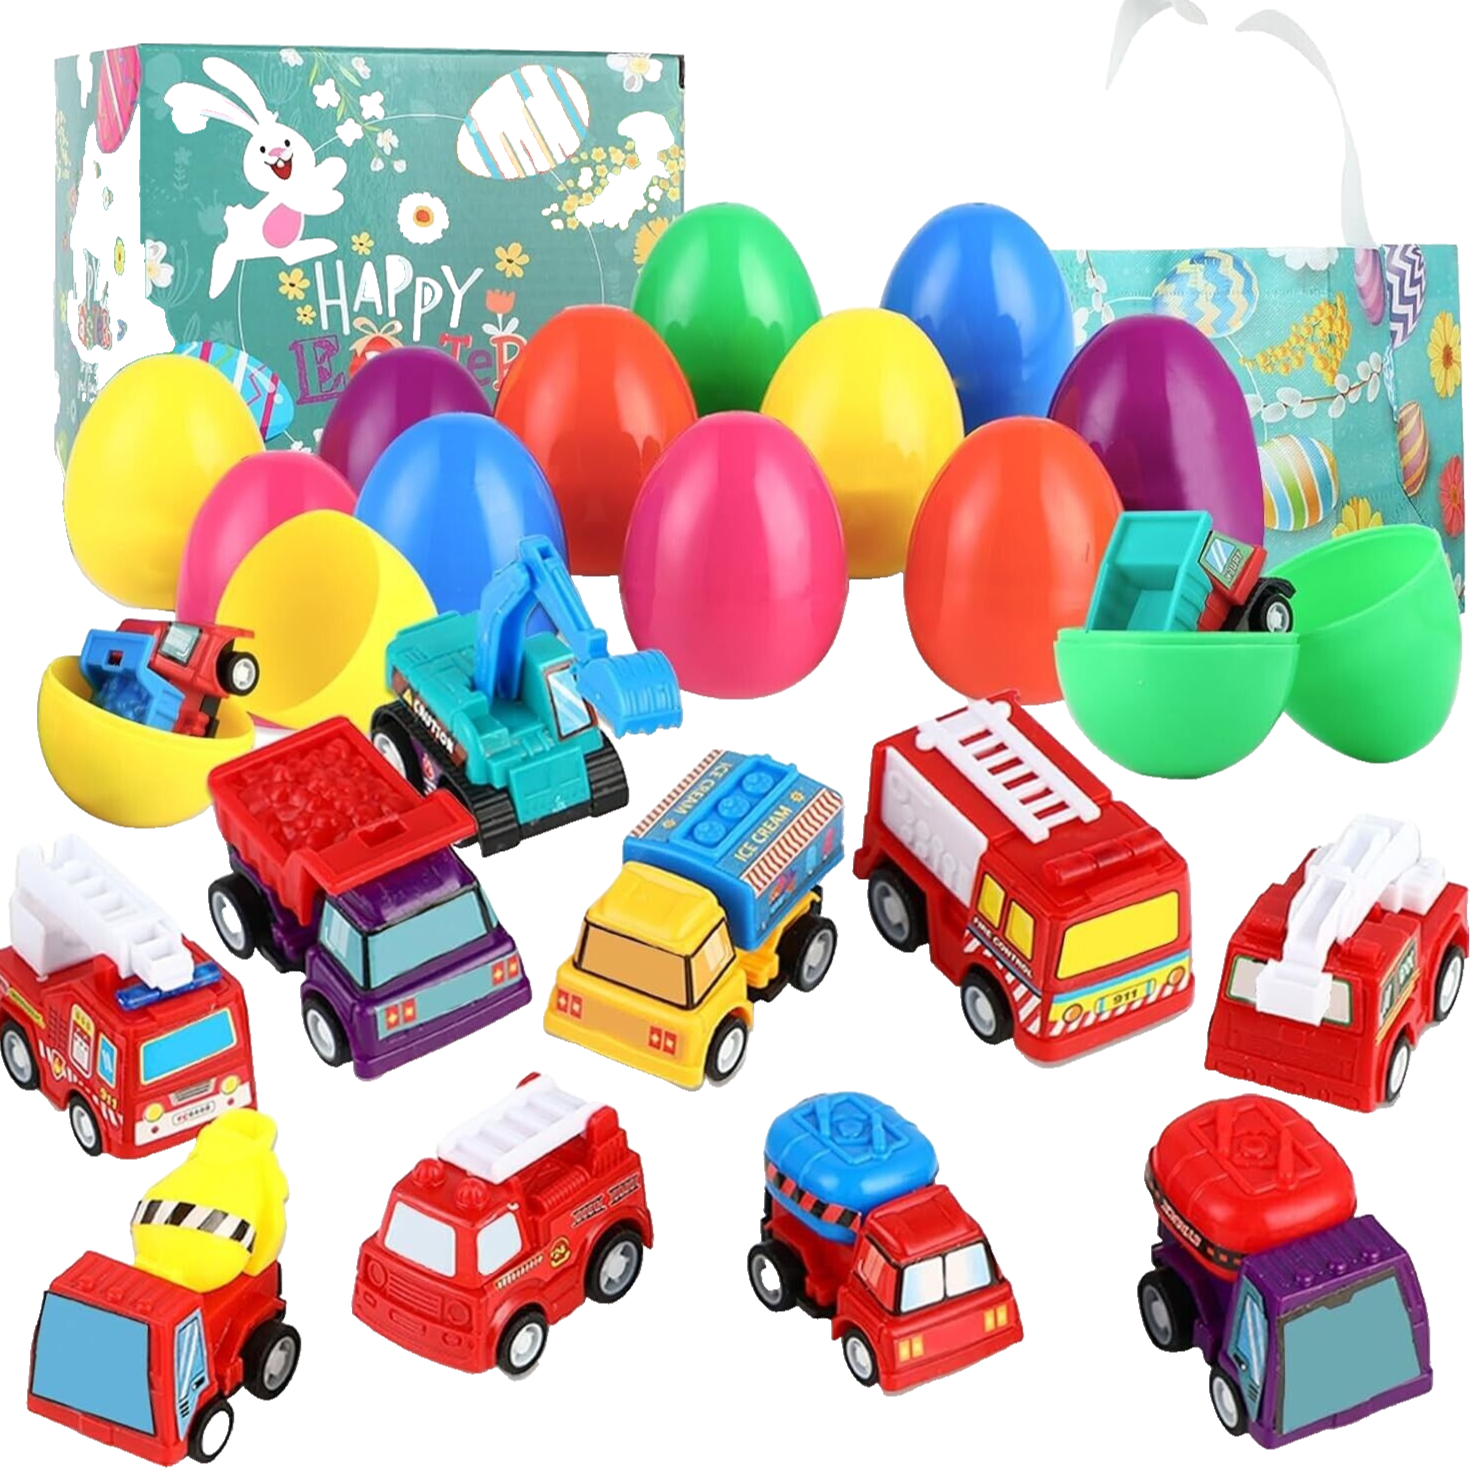 Easter-Eggs with Pull-Back Engineering Vehicles Inside  12 Pack Kids Ages 3+ NEW - $17.74